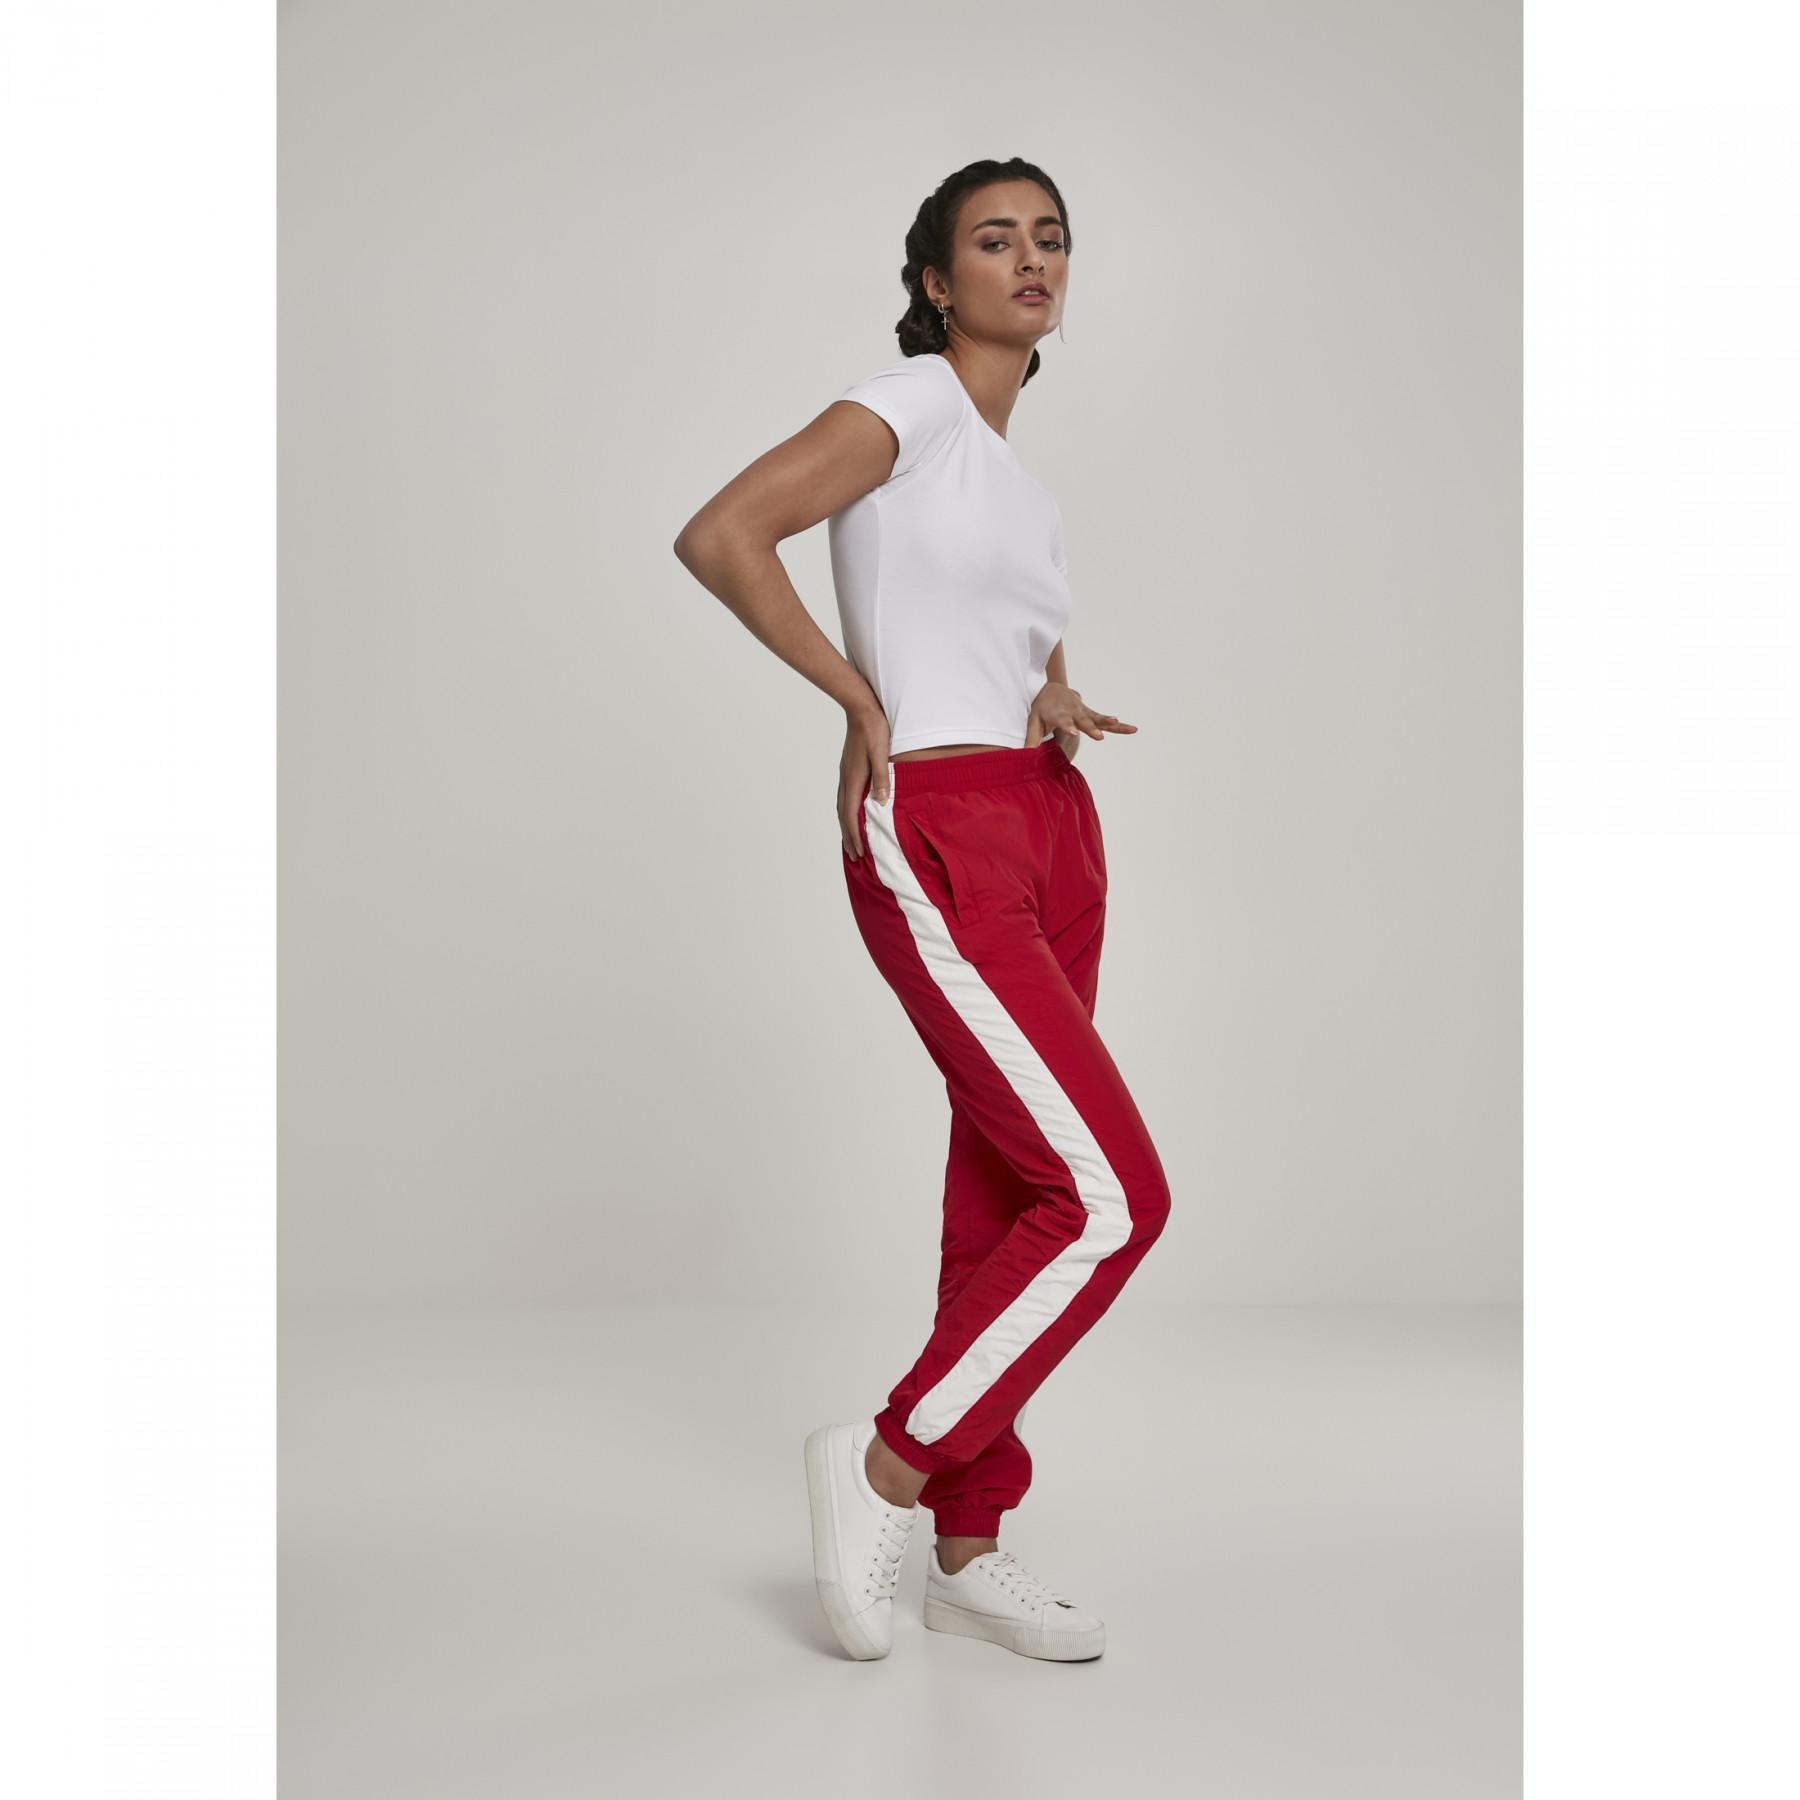 Pant donna Urban Classic a righe crinkle GT